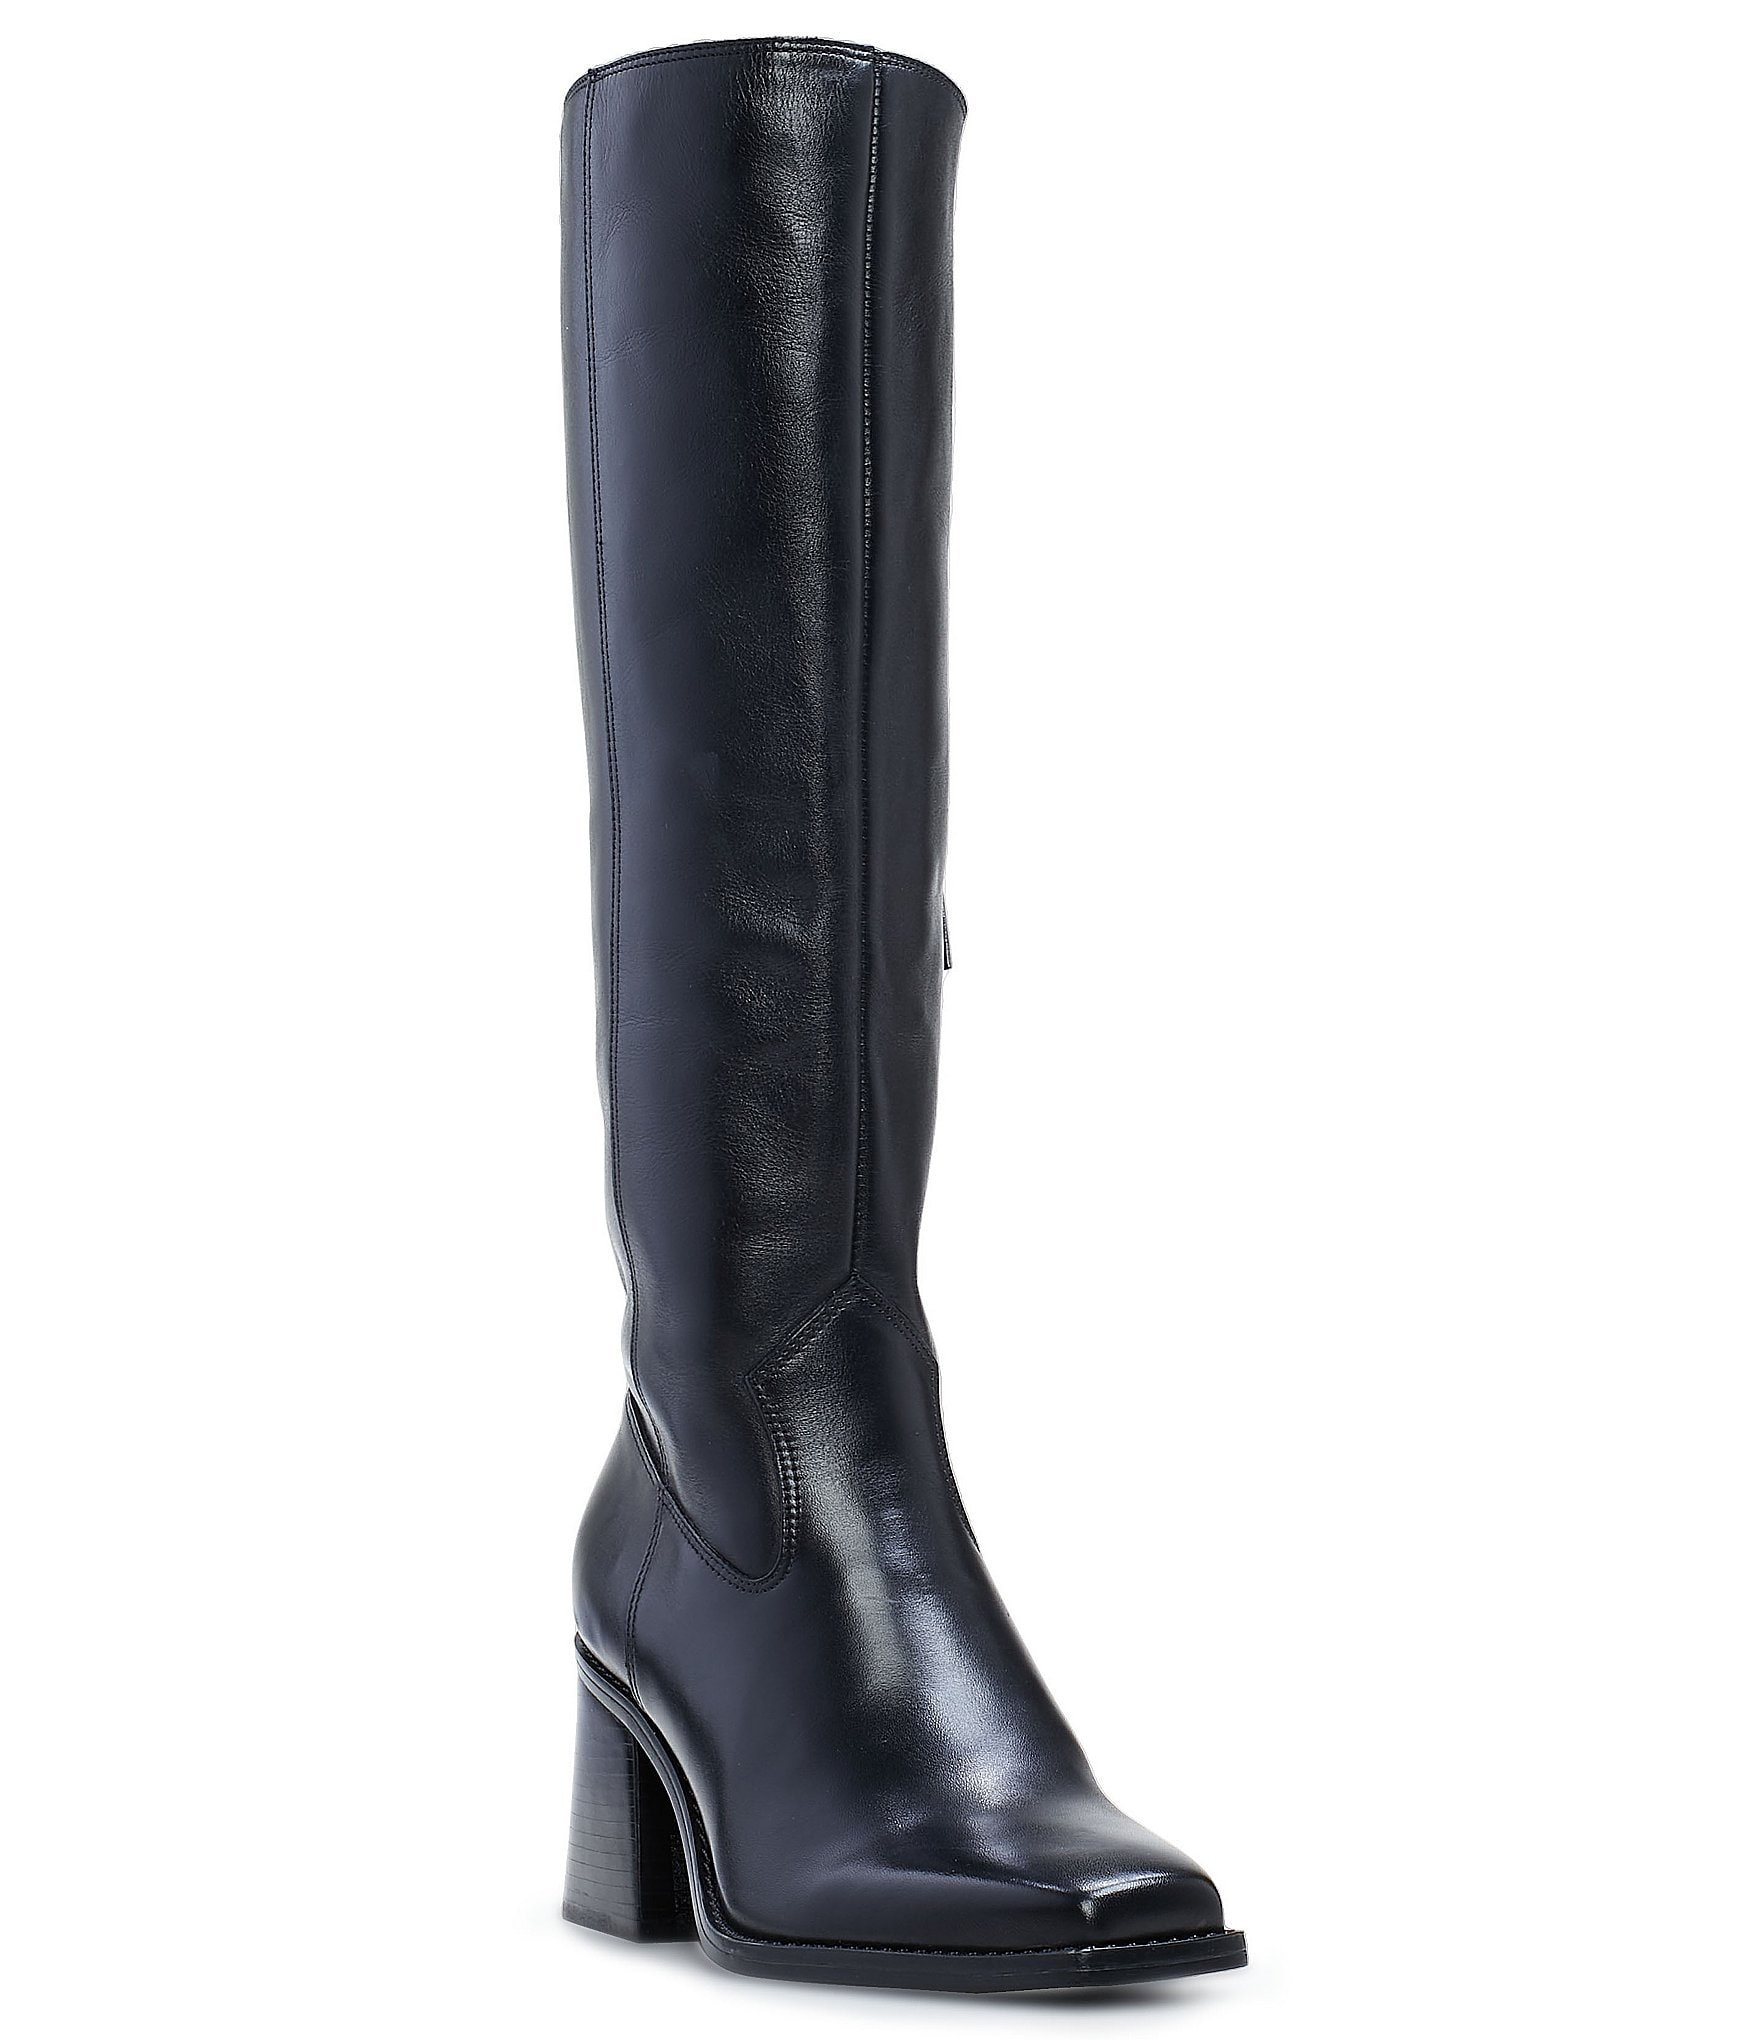 Lane Bryant 10 WIDE tall black knee high boots | Black knee high boots,  Black knees, Knee high boots